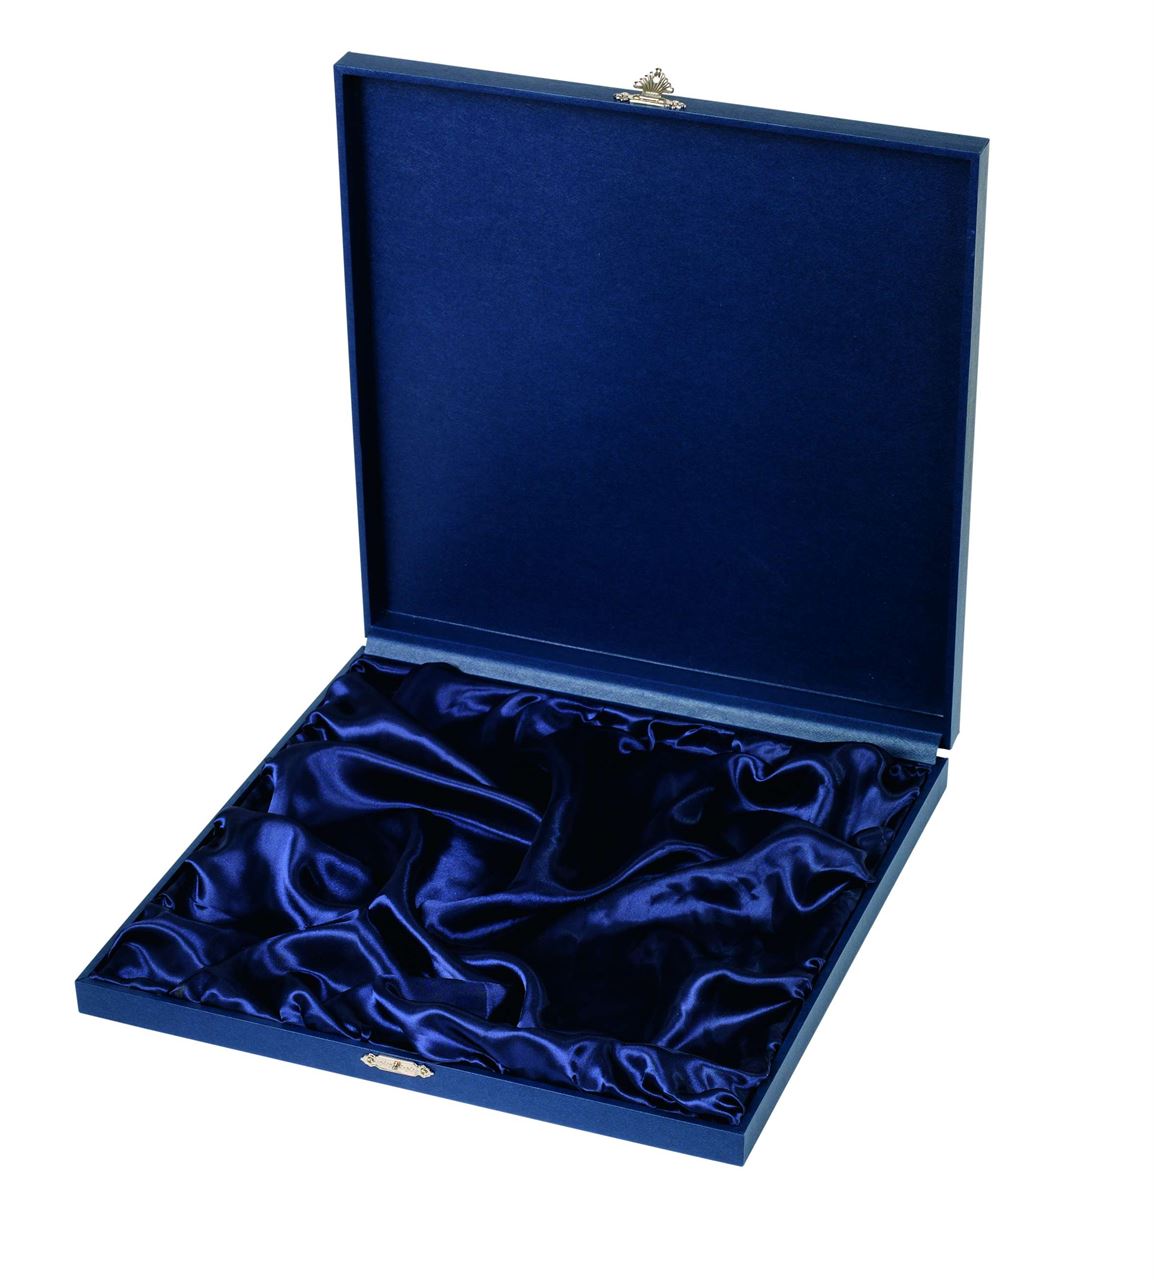 Supplied with a luxury wooden presentation case